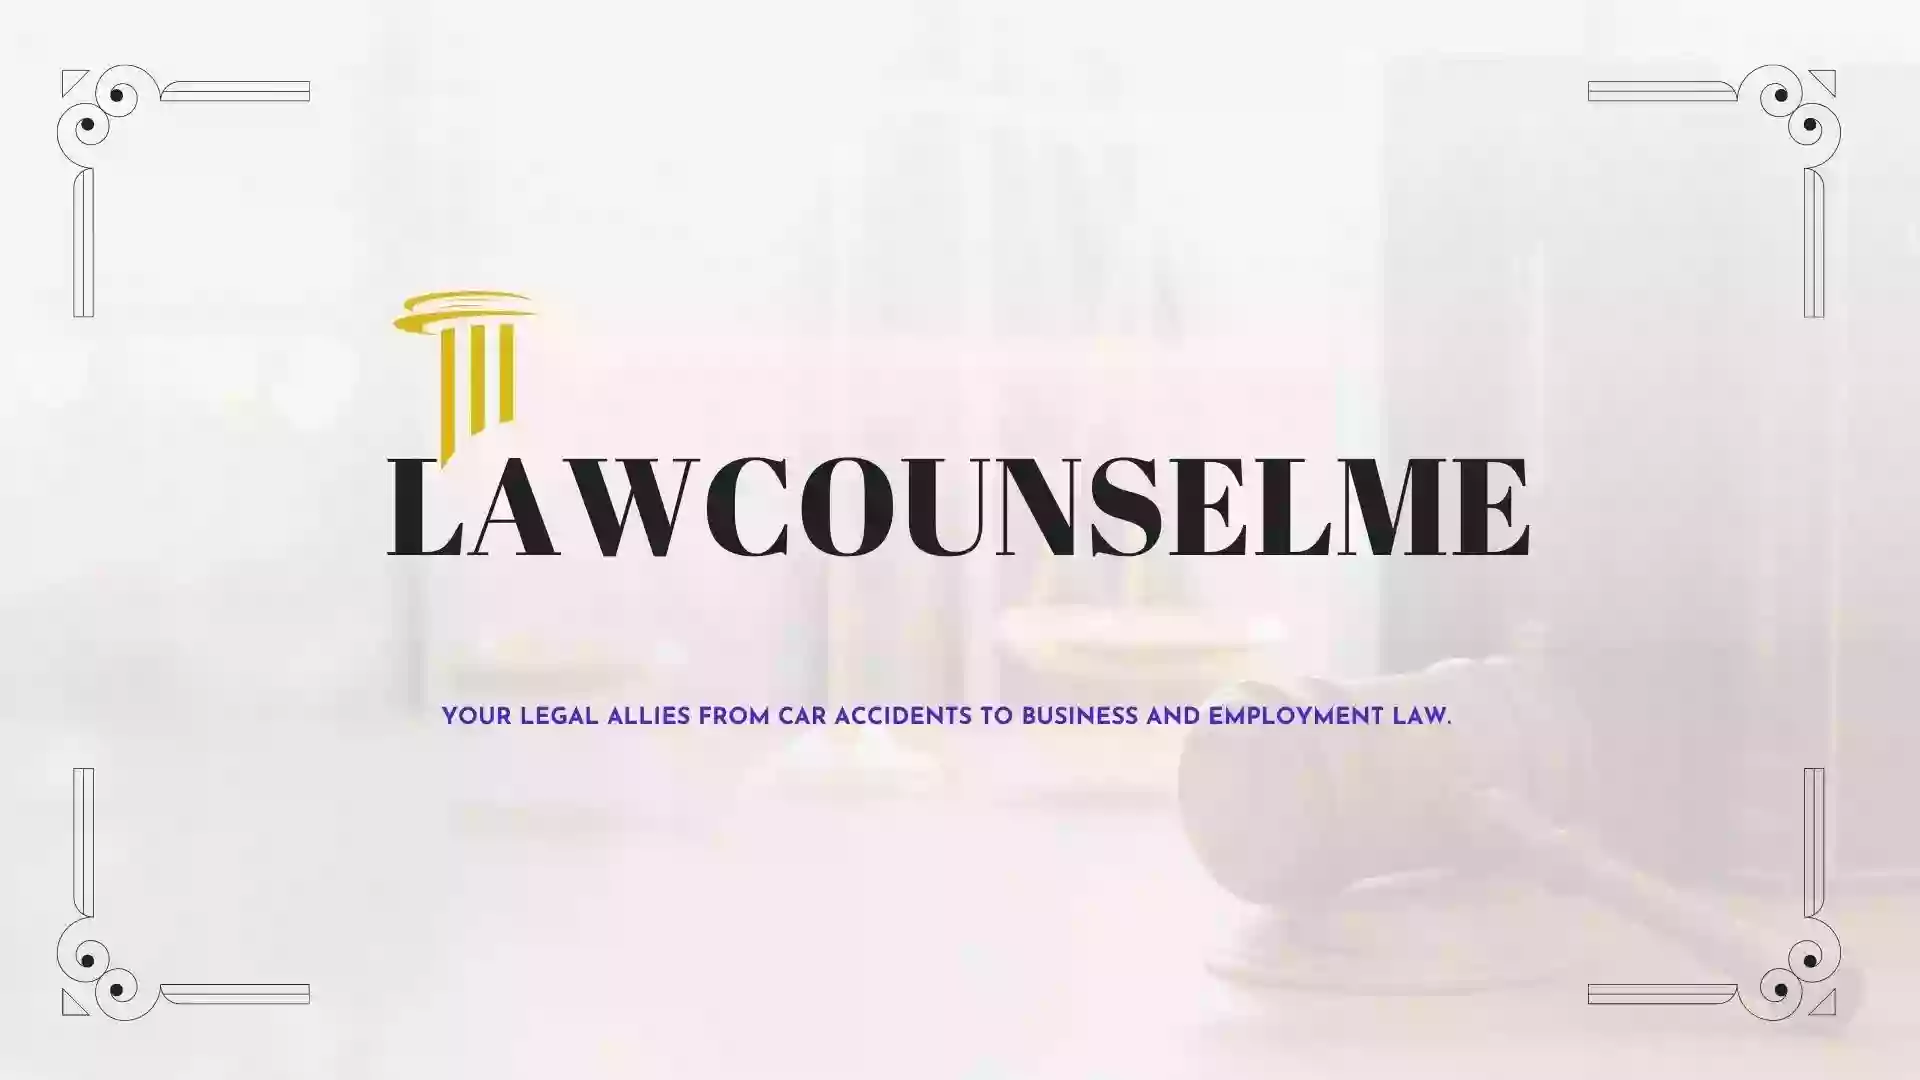 Shawn Council at lawcounselme is a top car accident Attorney, Business Lawyer and Employment Law Attorney